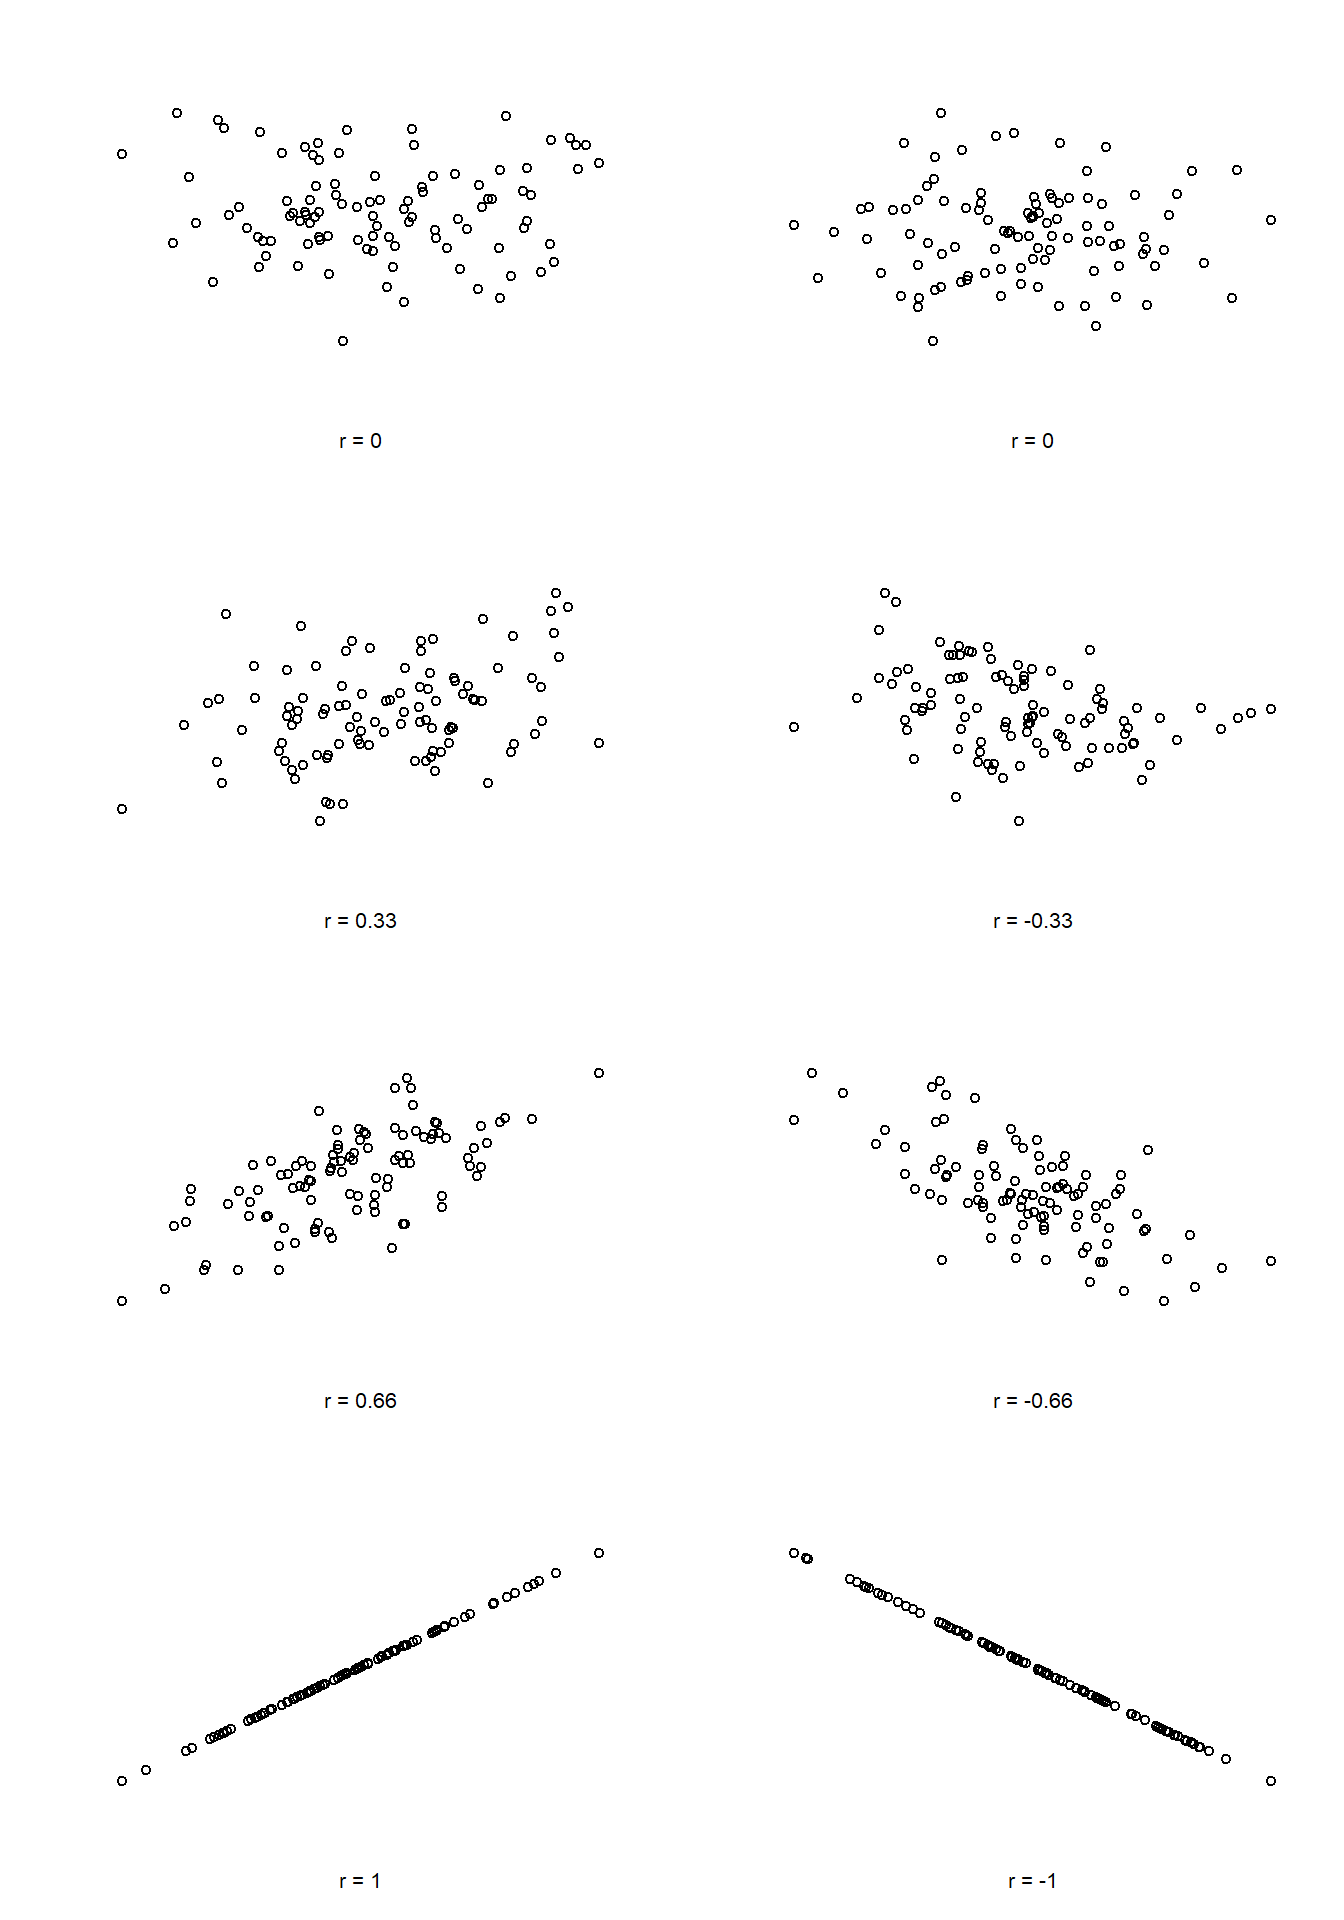 Illustration of the effect of varying the strength and direction of a correlation